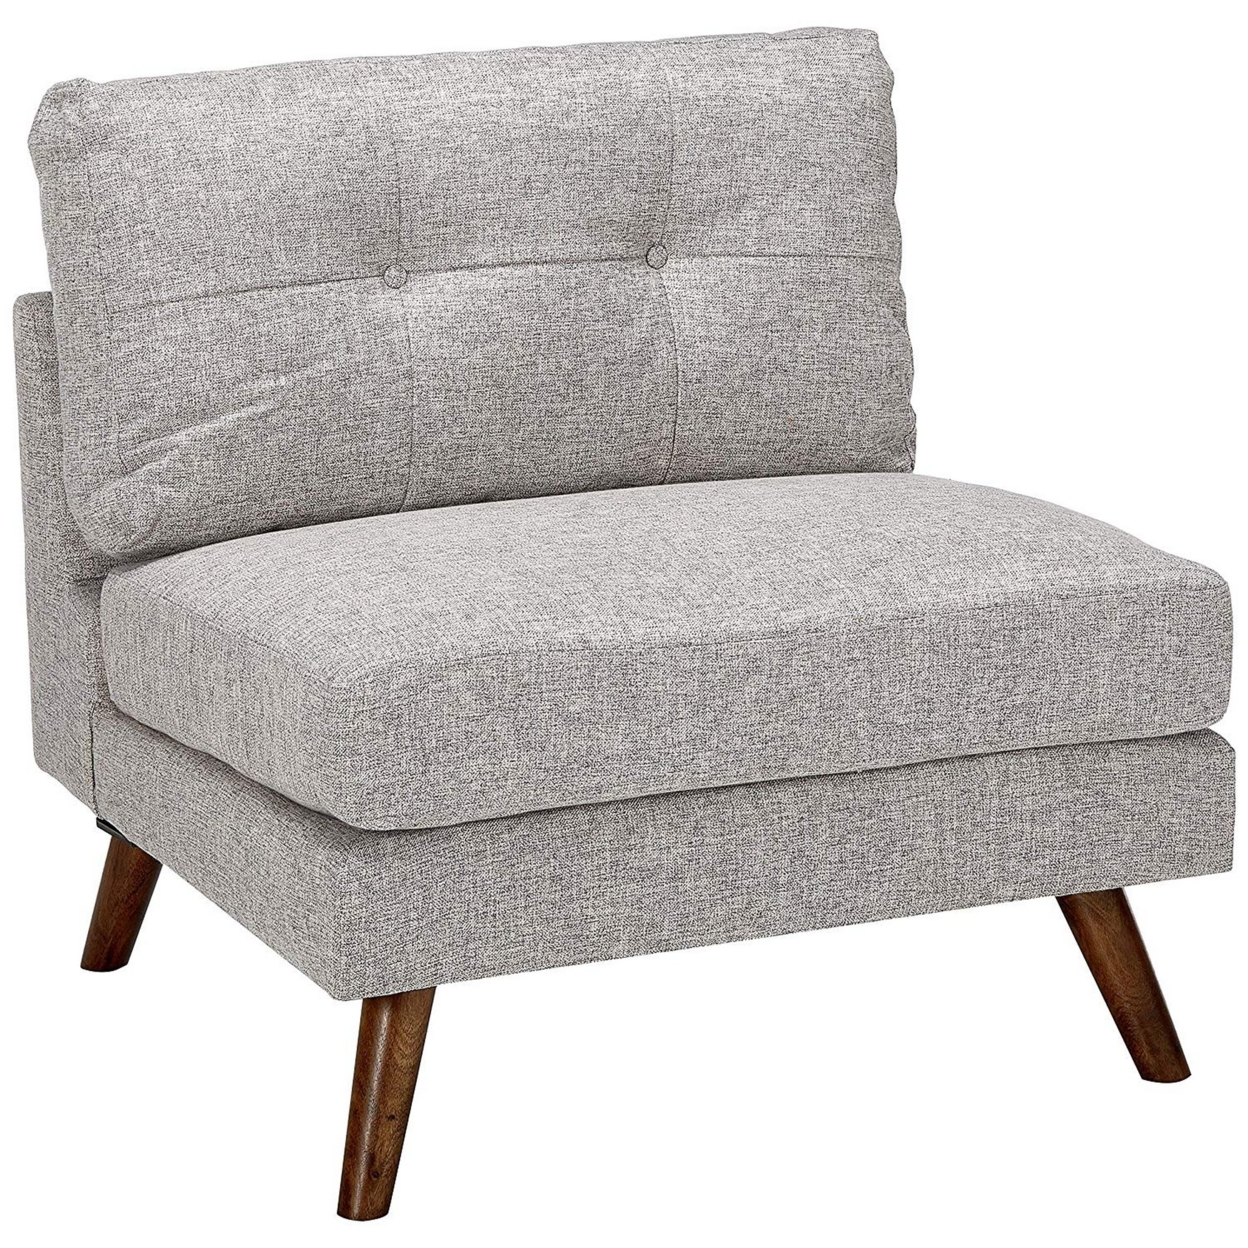 Fabric Upholstered Armless Chair With Tufted Back And Splayed Legs, Gray- Saltoro Sherpi